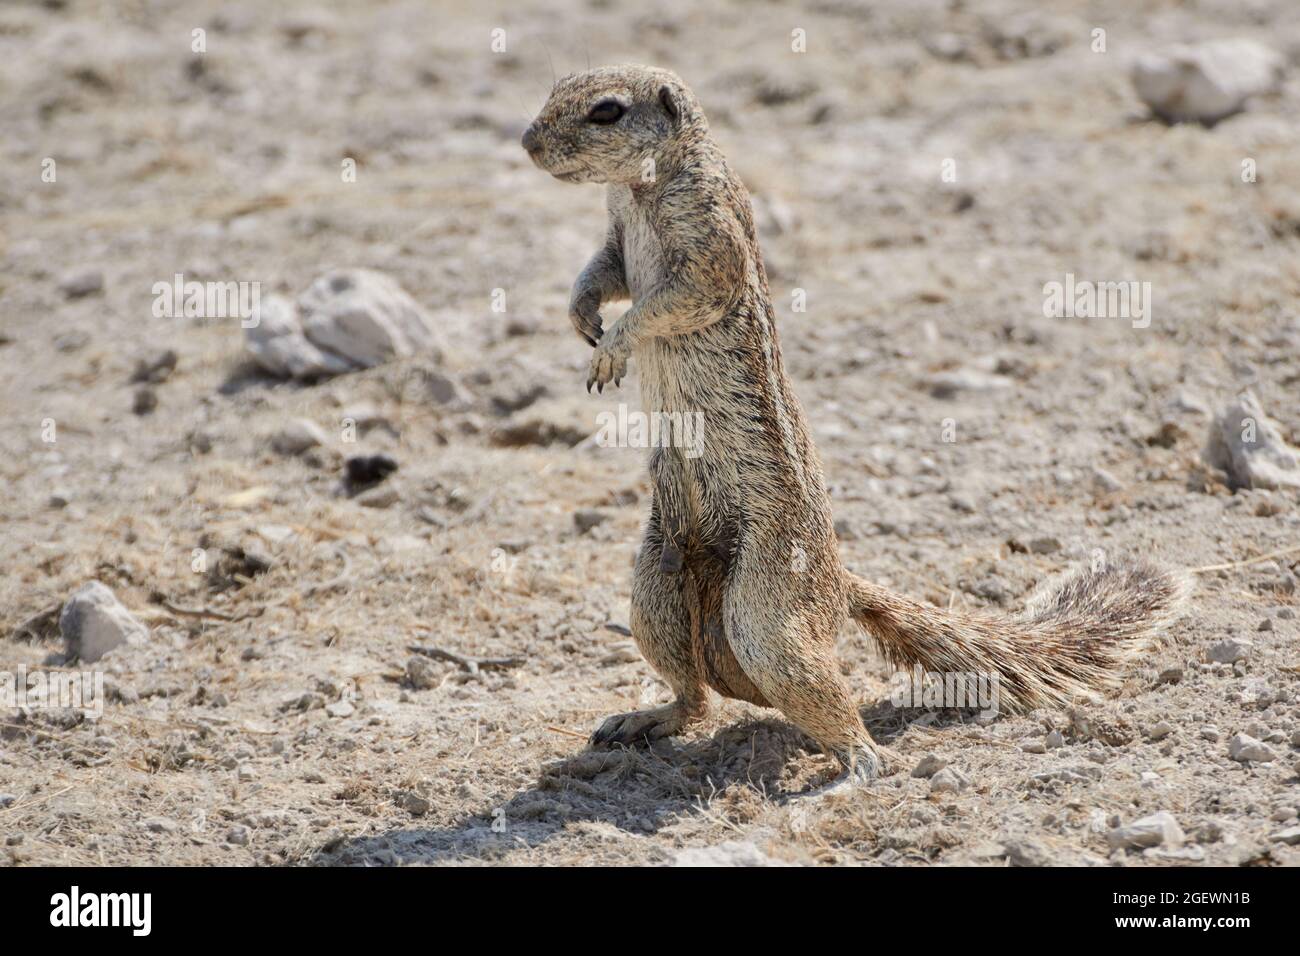 Cape ground squirrel or South African ground squirrel (Xerus inauris) in Namibia, Africa. Stock Photo